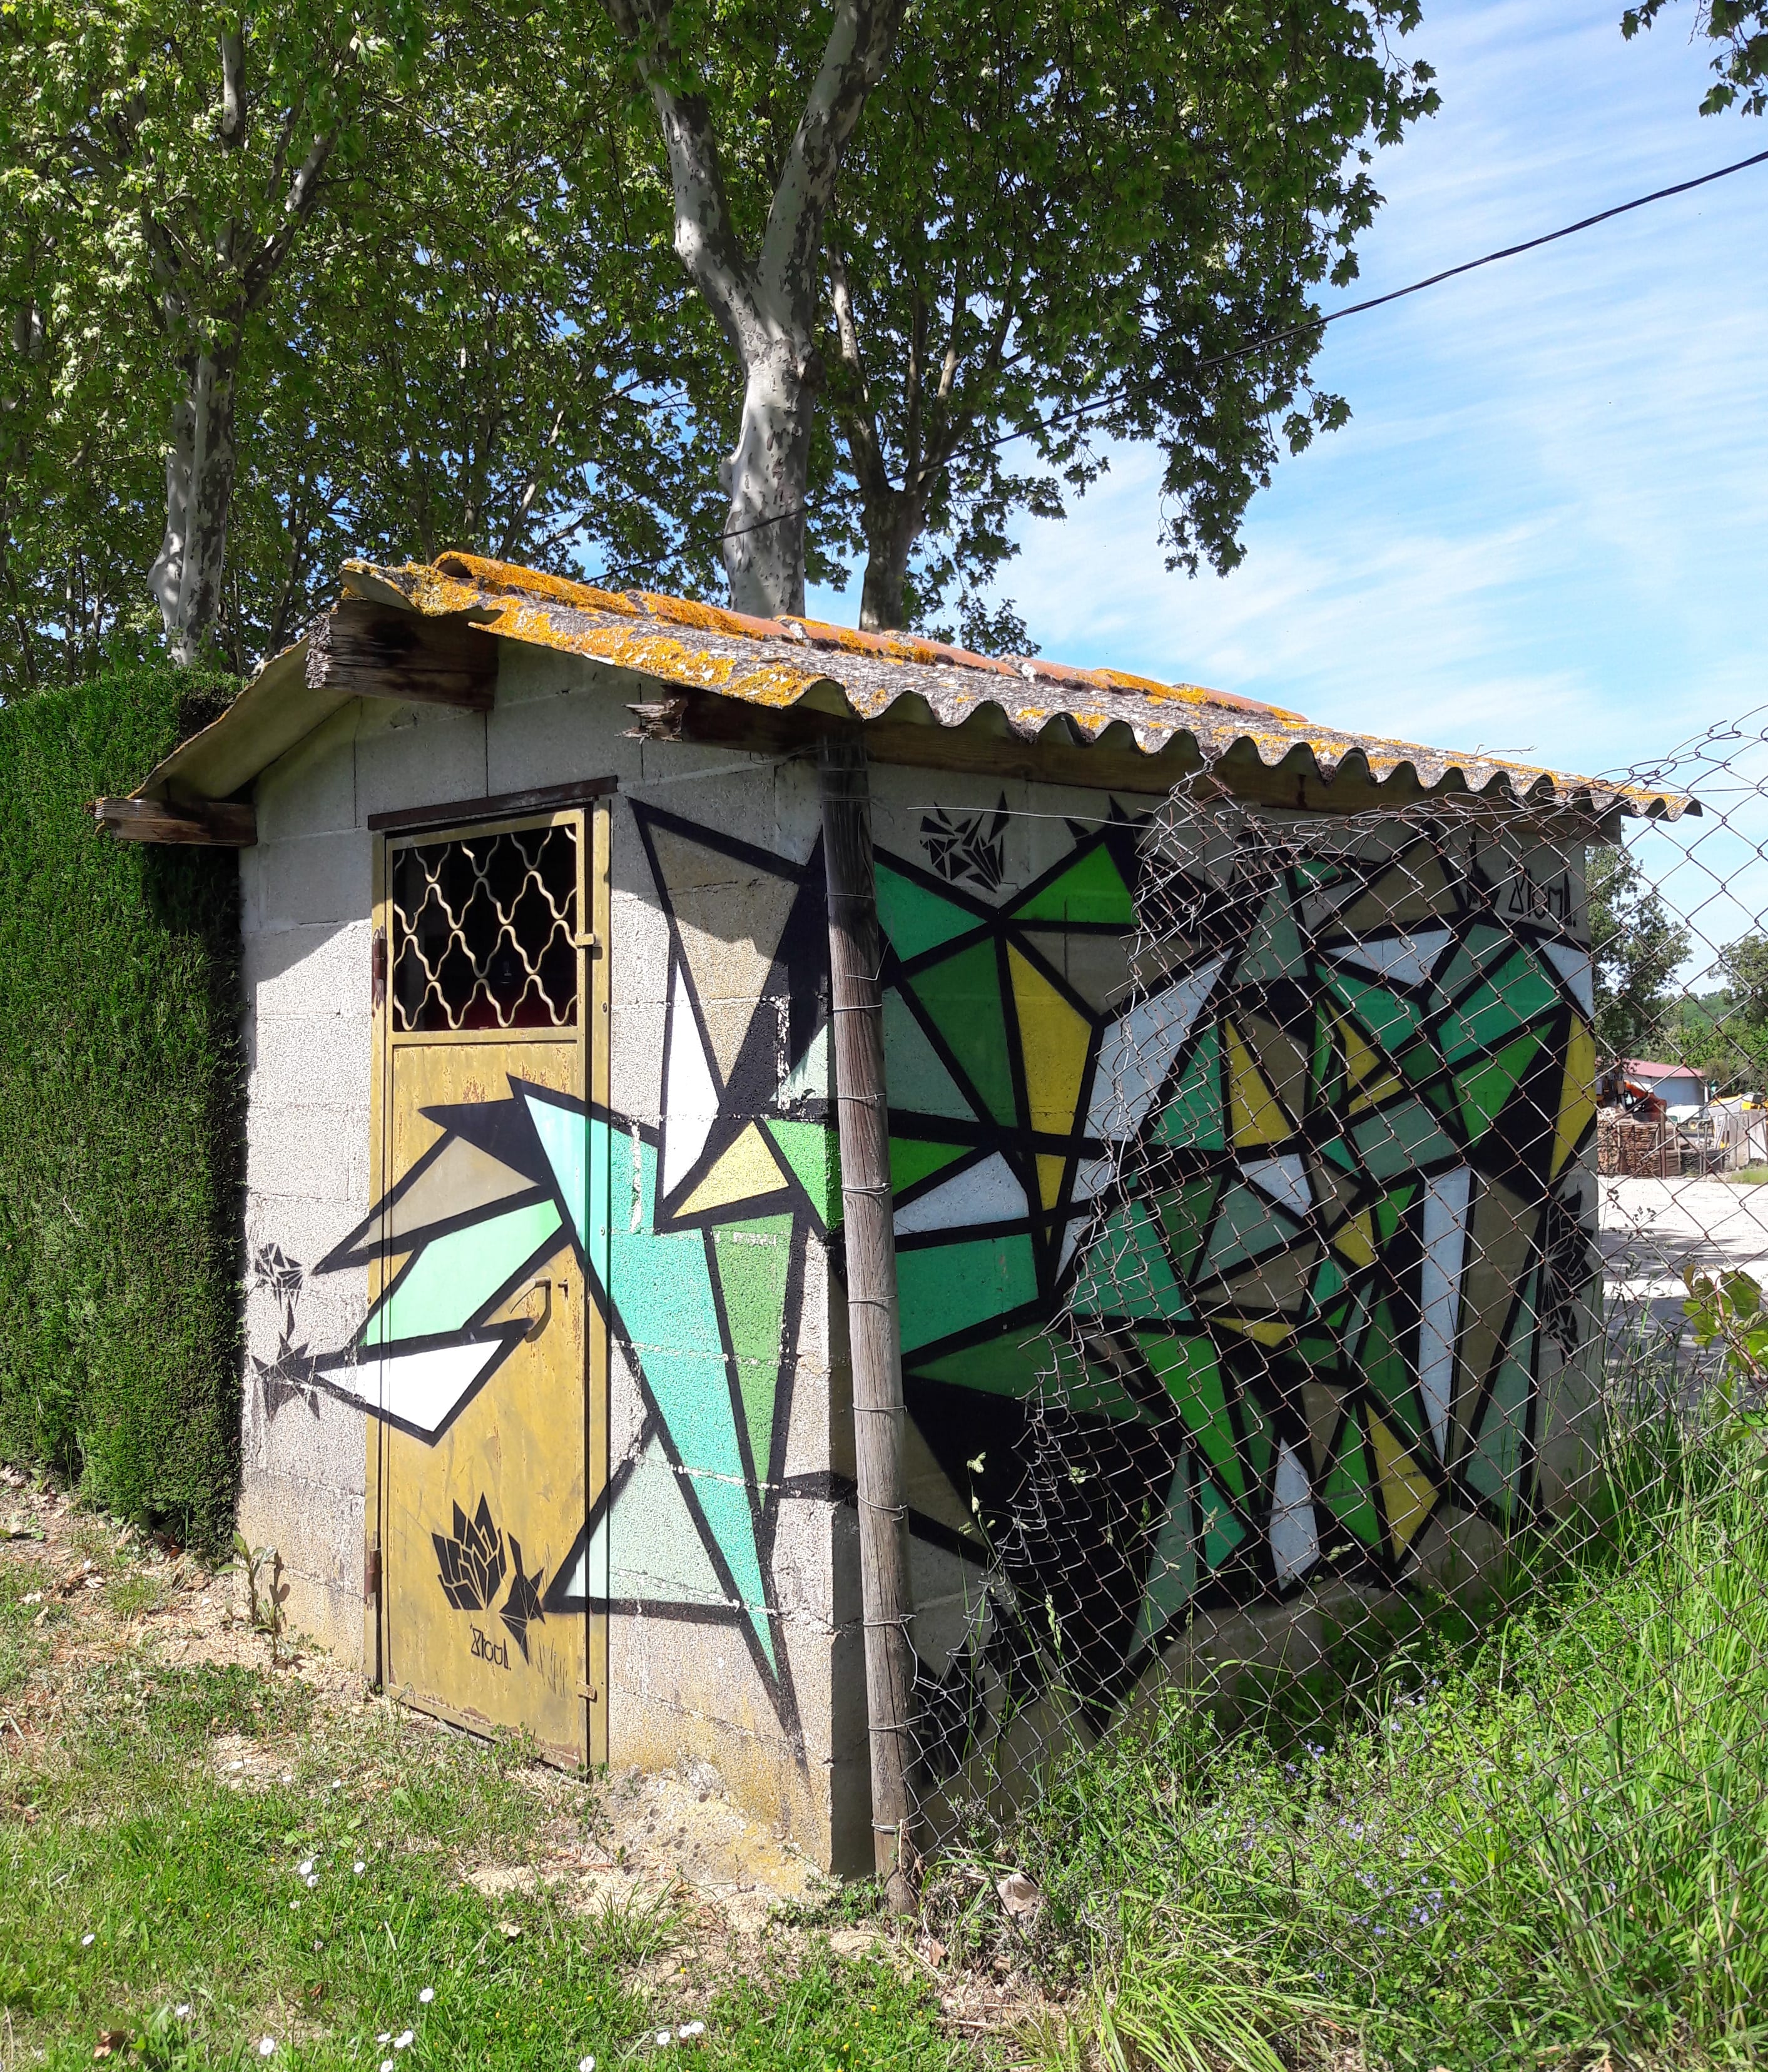 Graffiti 6473  by the artist Stoul captured by Mephisroth in Eauze France